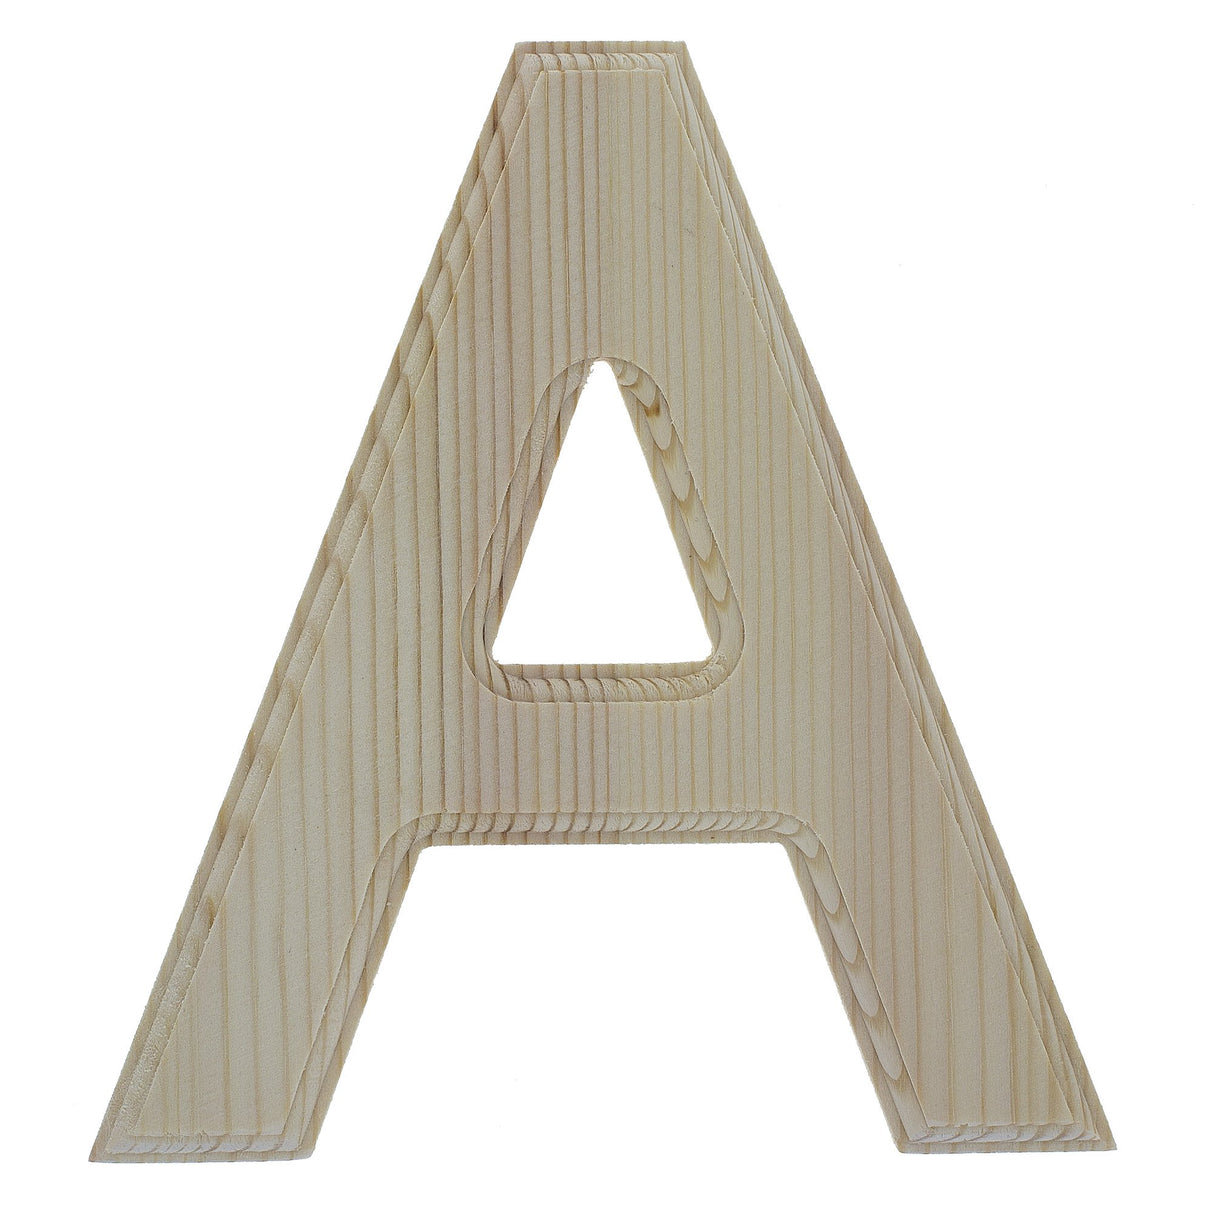 Wood Unfinished Wooden Arial Font Letter A (6.25 Inches) in Beige color